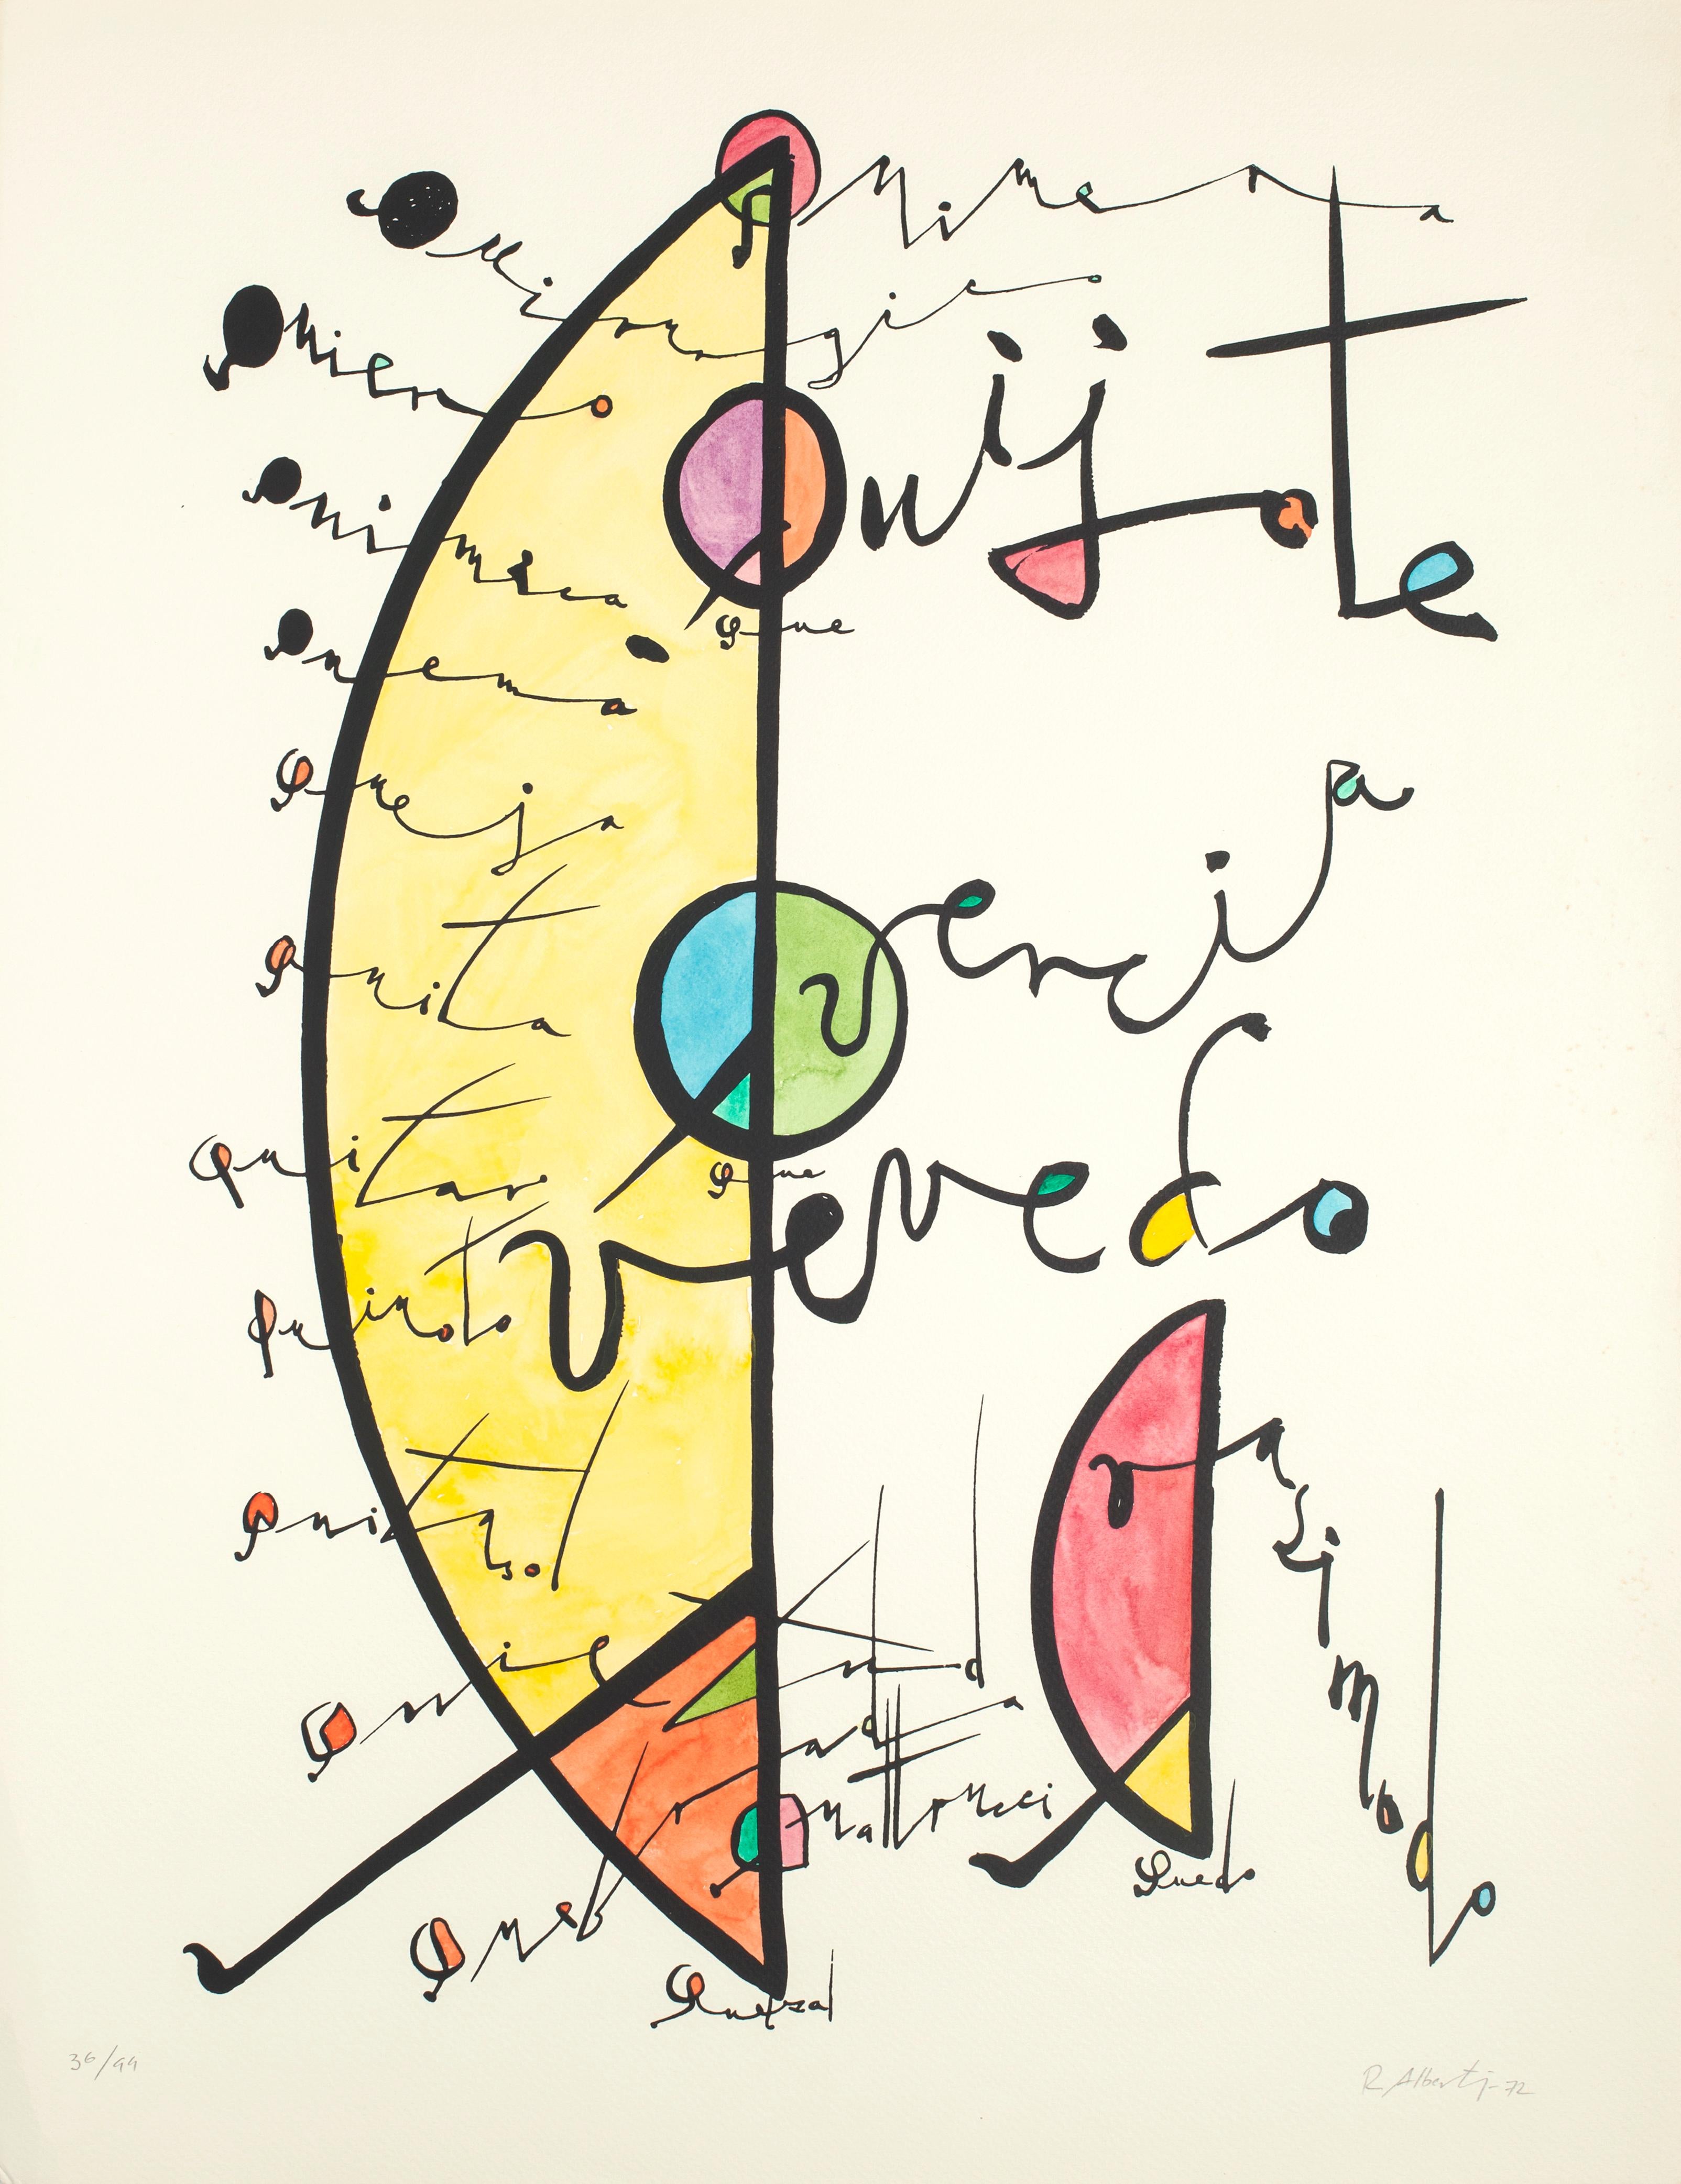 Rafael Alberti Abstract Print - Letter D - Hand-Colored Lithograph by Raphael Alberti - 1972